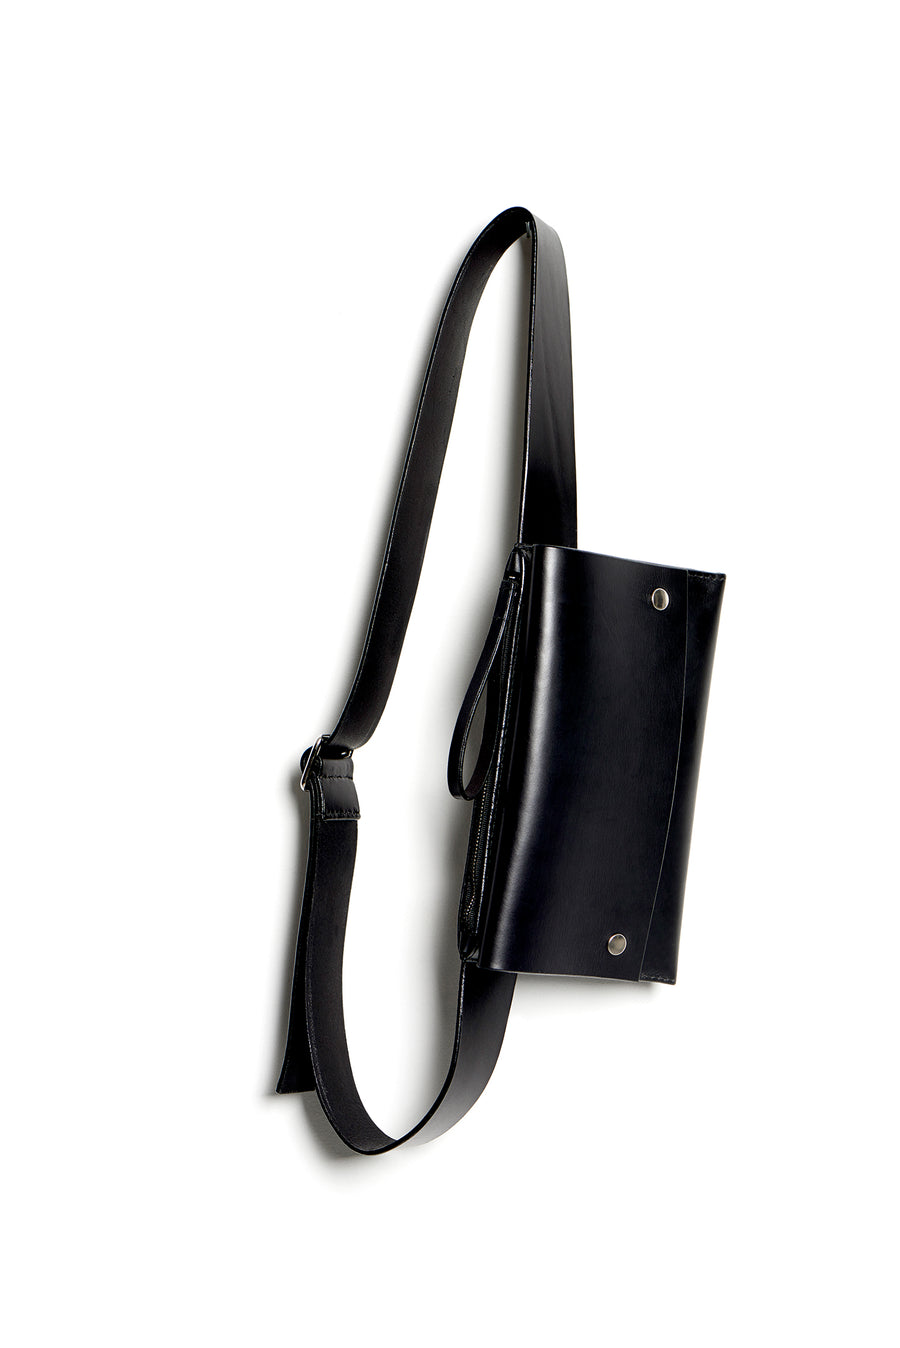 Leather bumbag: RIGMOR DOUBLE (black)